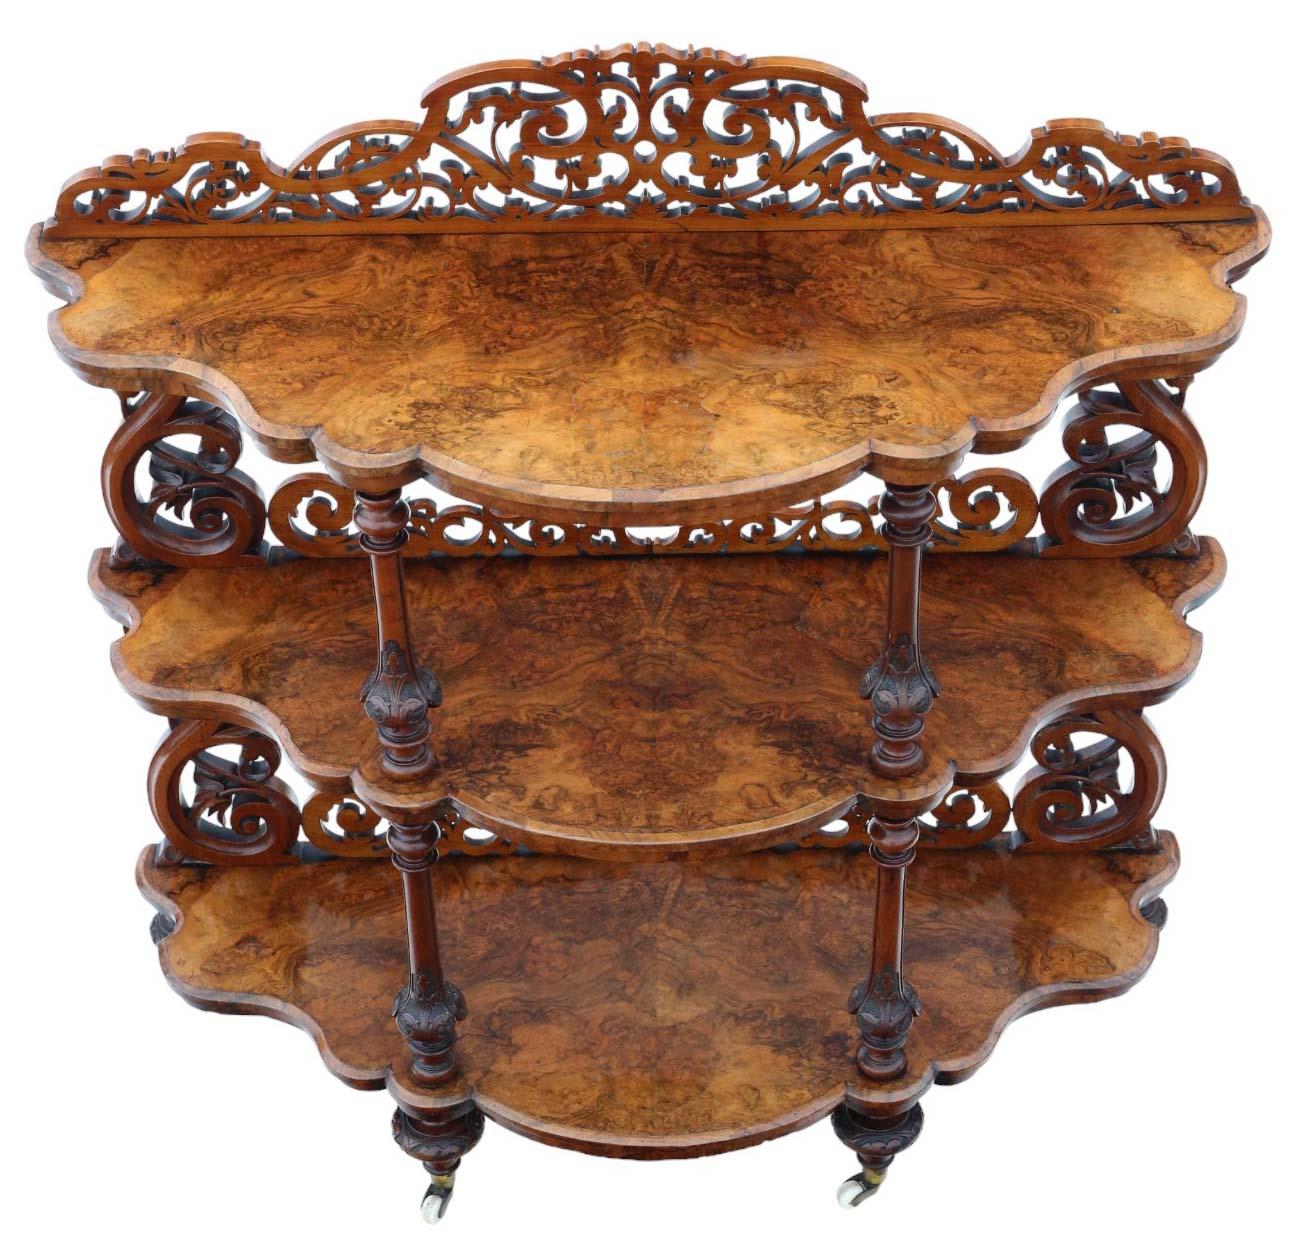 Introducing an exquisite 19th Century Burr Walnut Demi-Lune Console Table—a fine quality antique display serving whatnot that's sure to impress.

This delightful piece exudes age, charm, and character, making it a very rare decorative find. Crafted